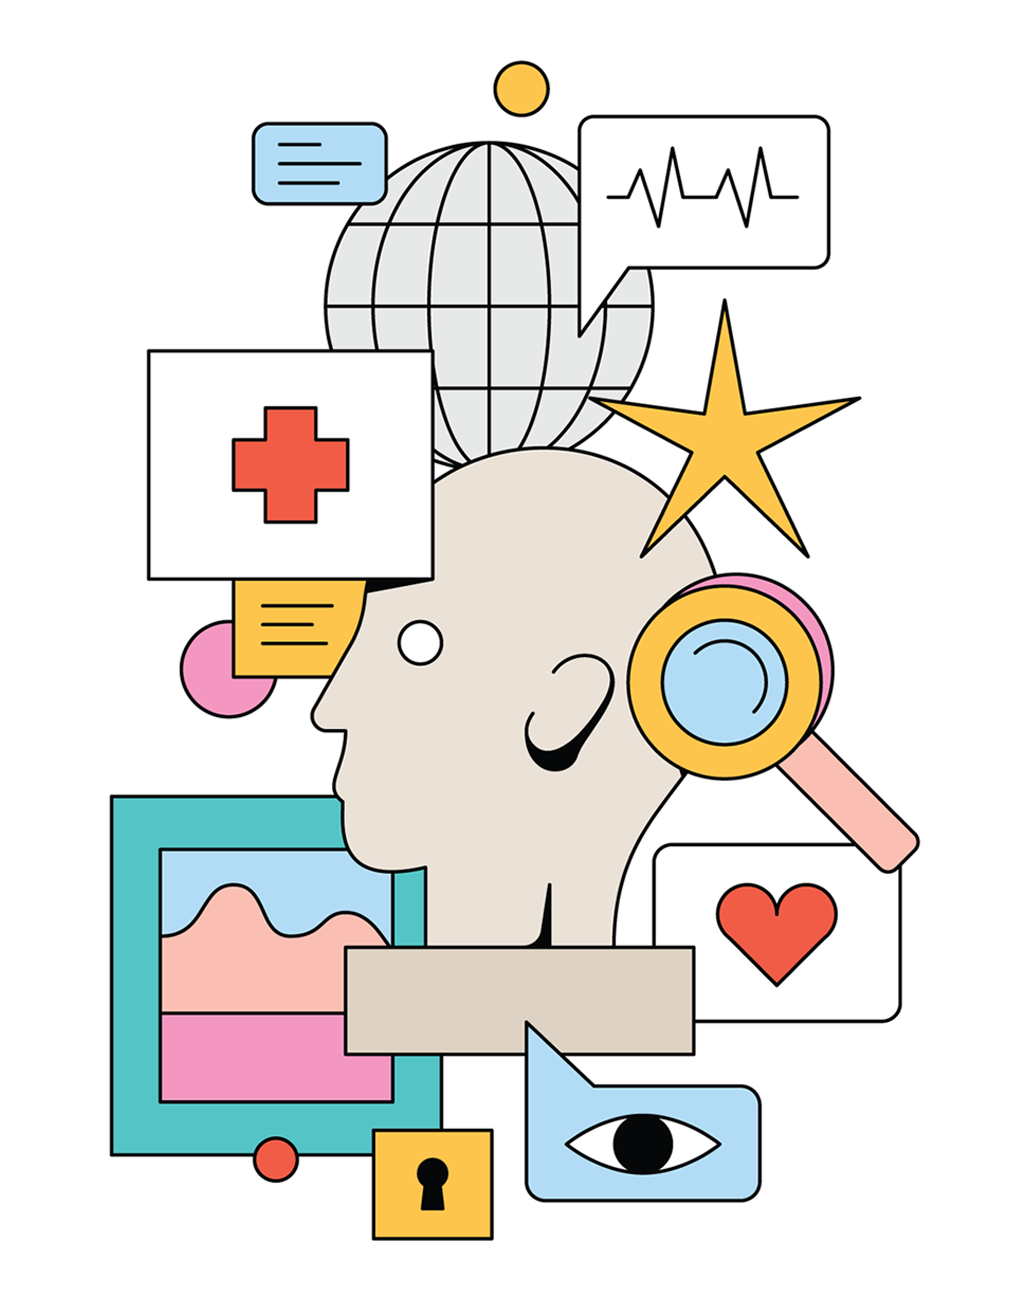 A person's head surrounded by globe, thought bubble, magnifying glass, chart, eye, red cross and heart